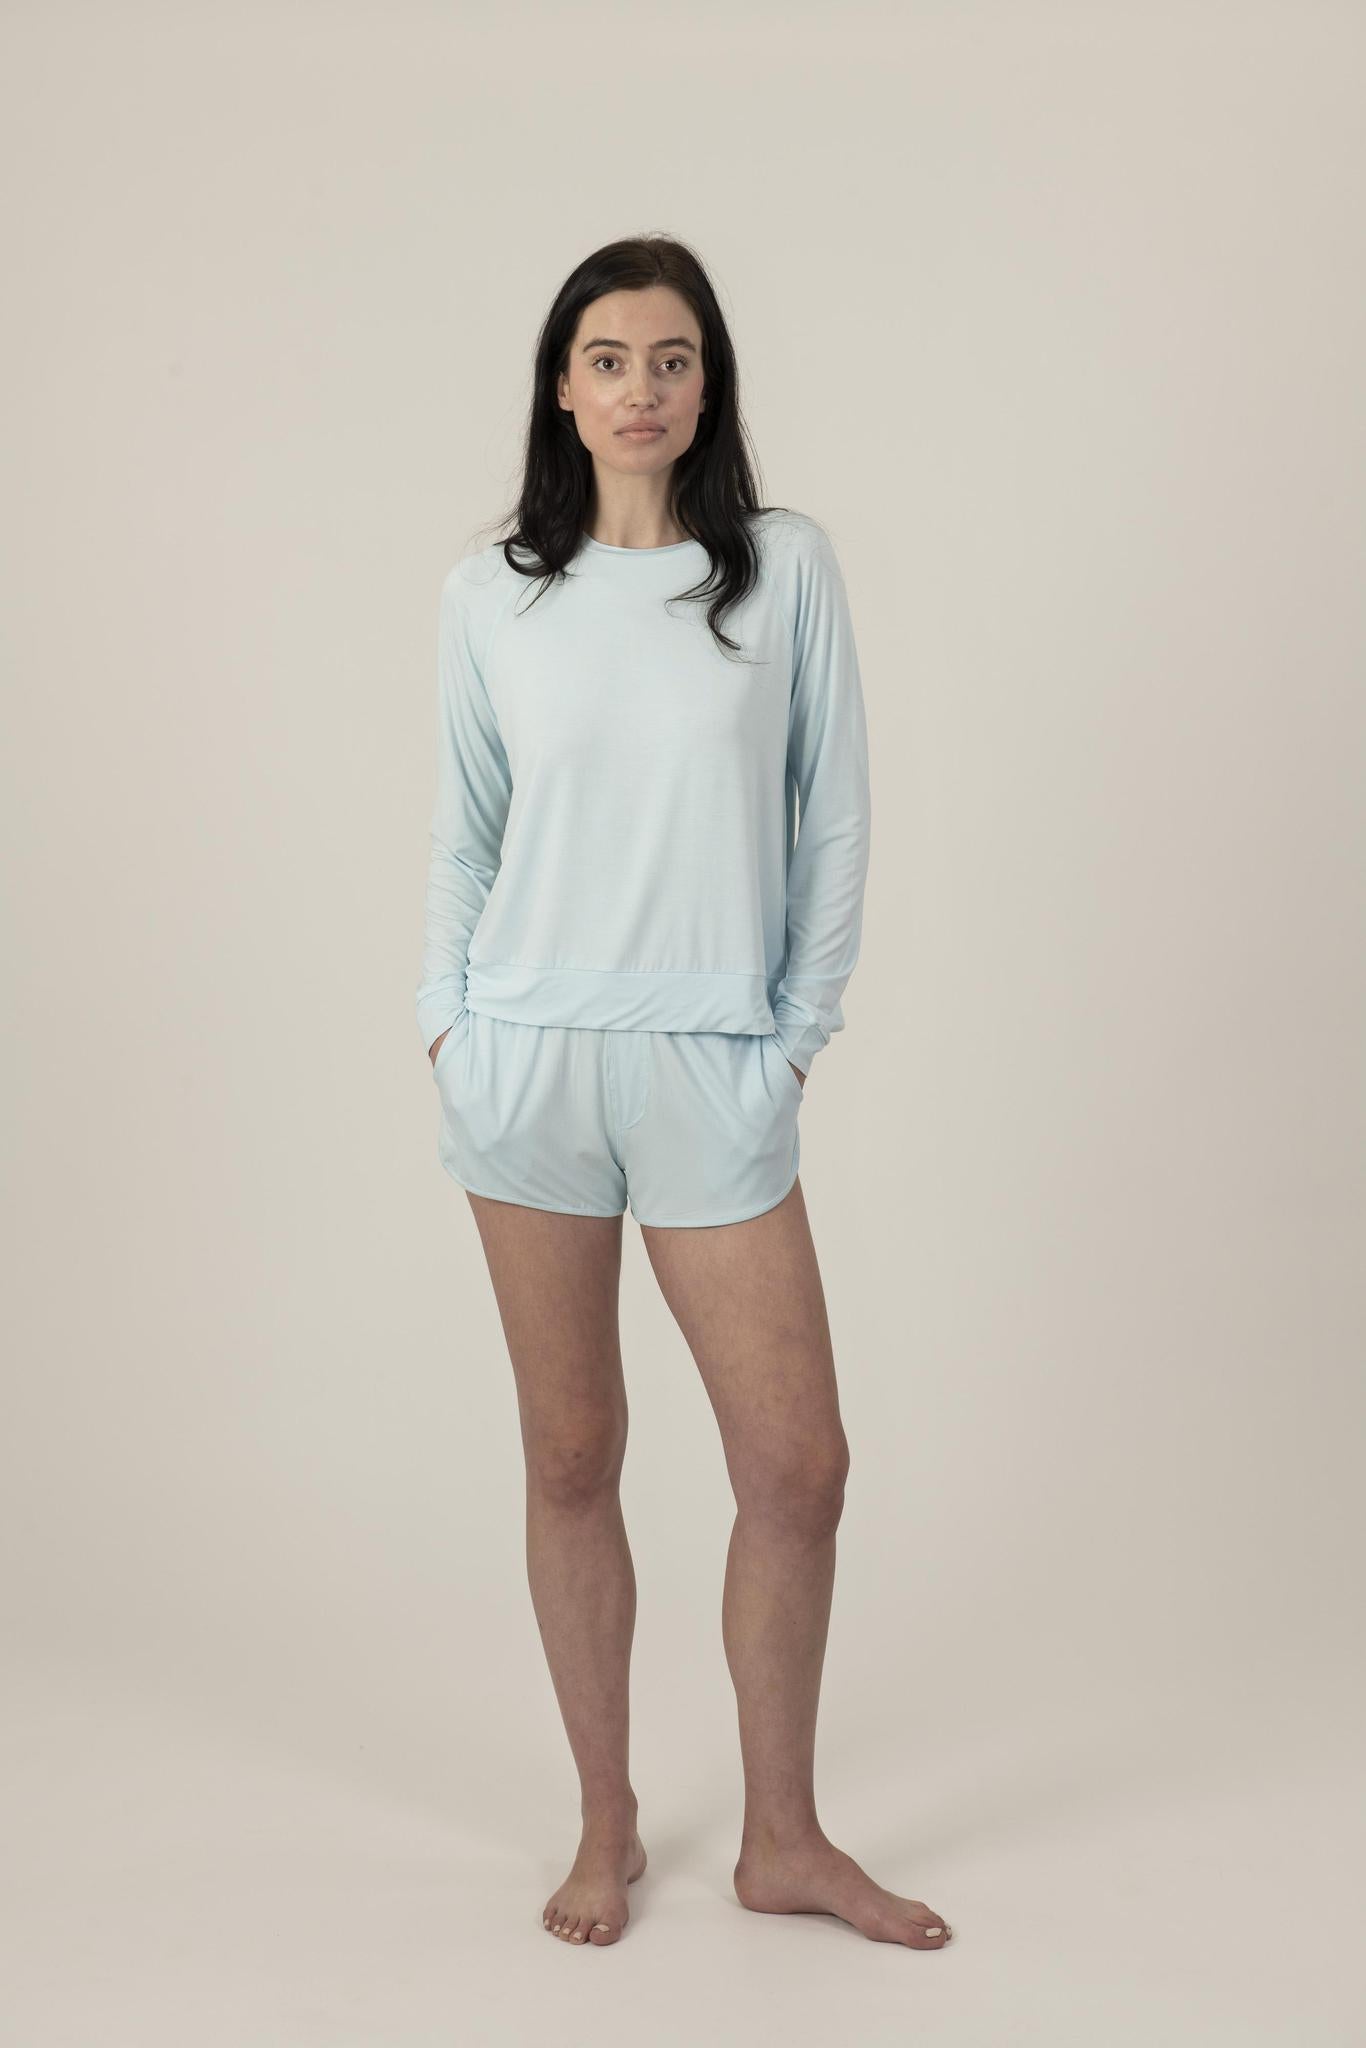 Long sleeve loose fit top in ice blue